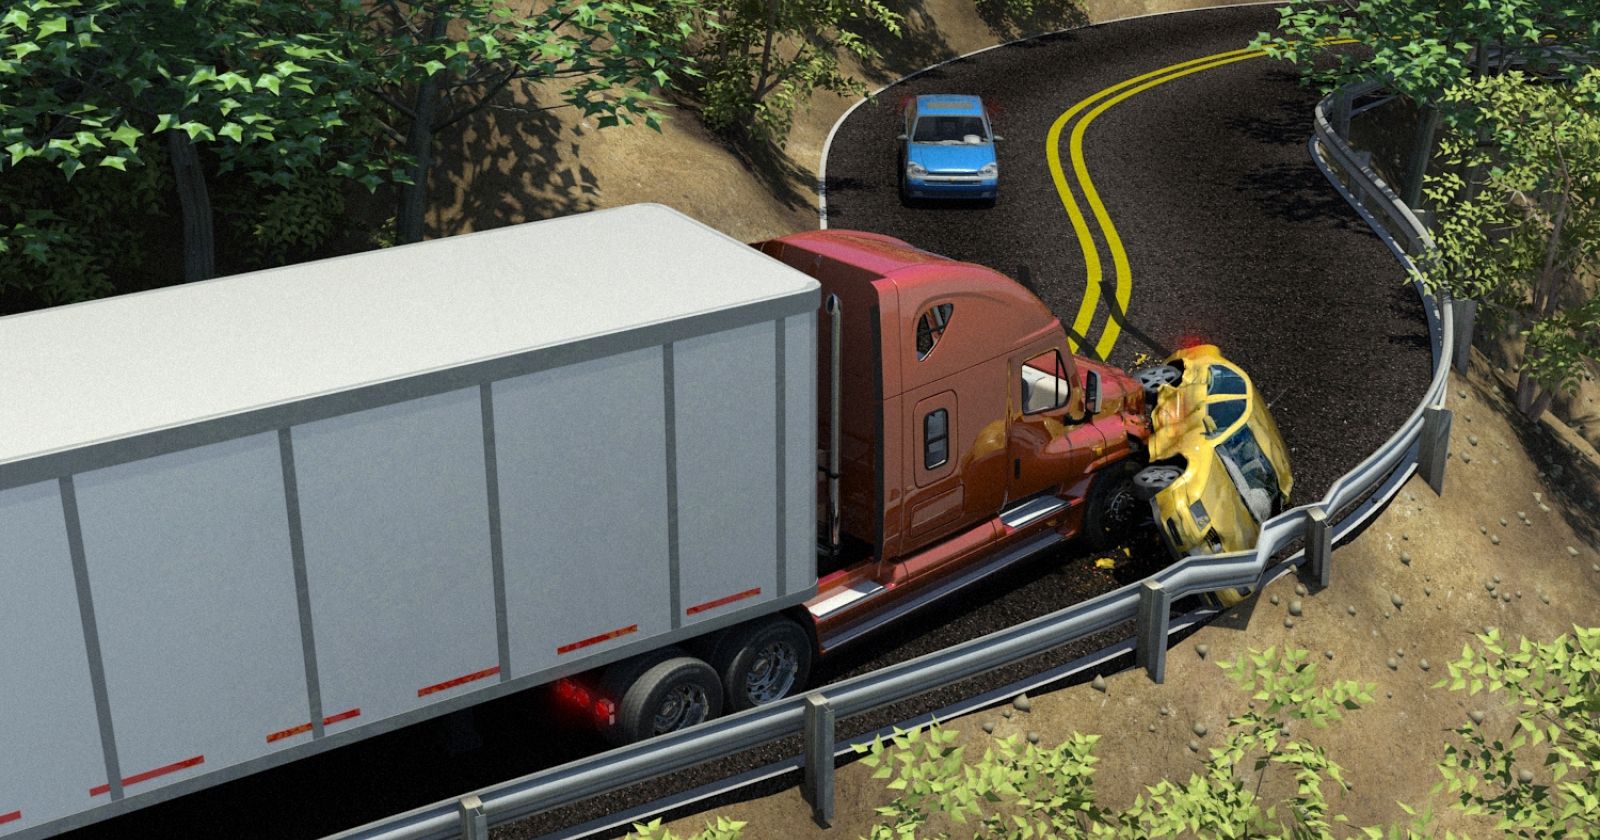 Graphic depicting tractor trailer accident